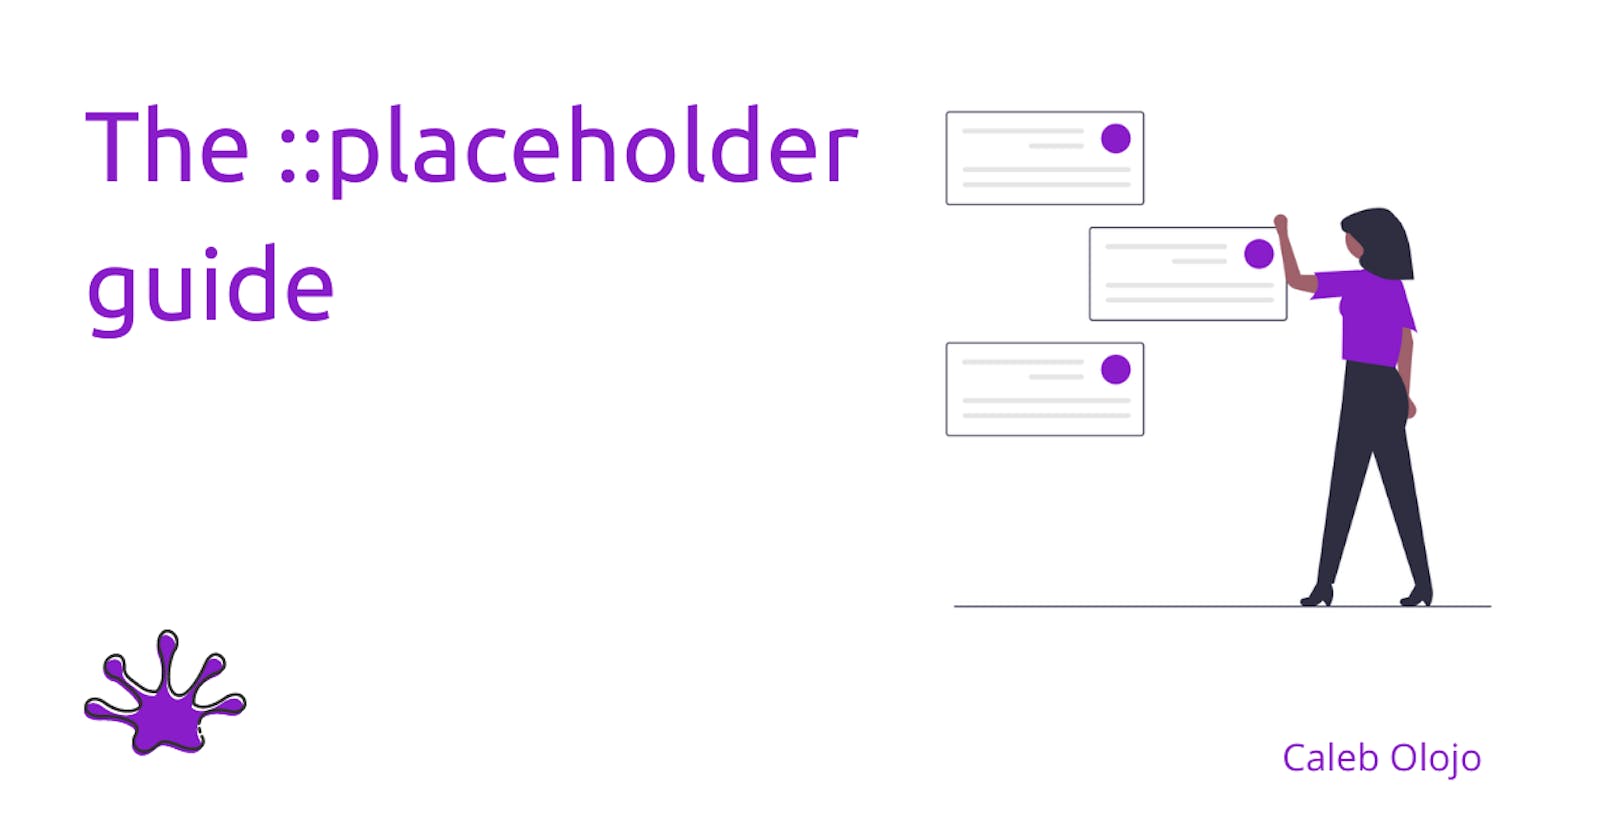 A simple guide to the placeholder attribute